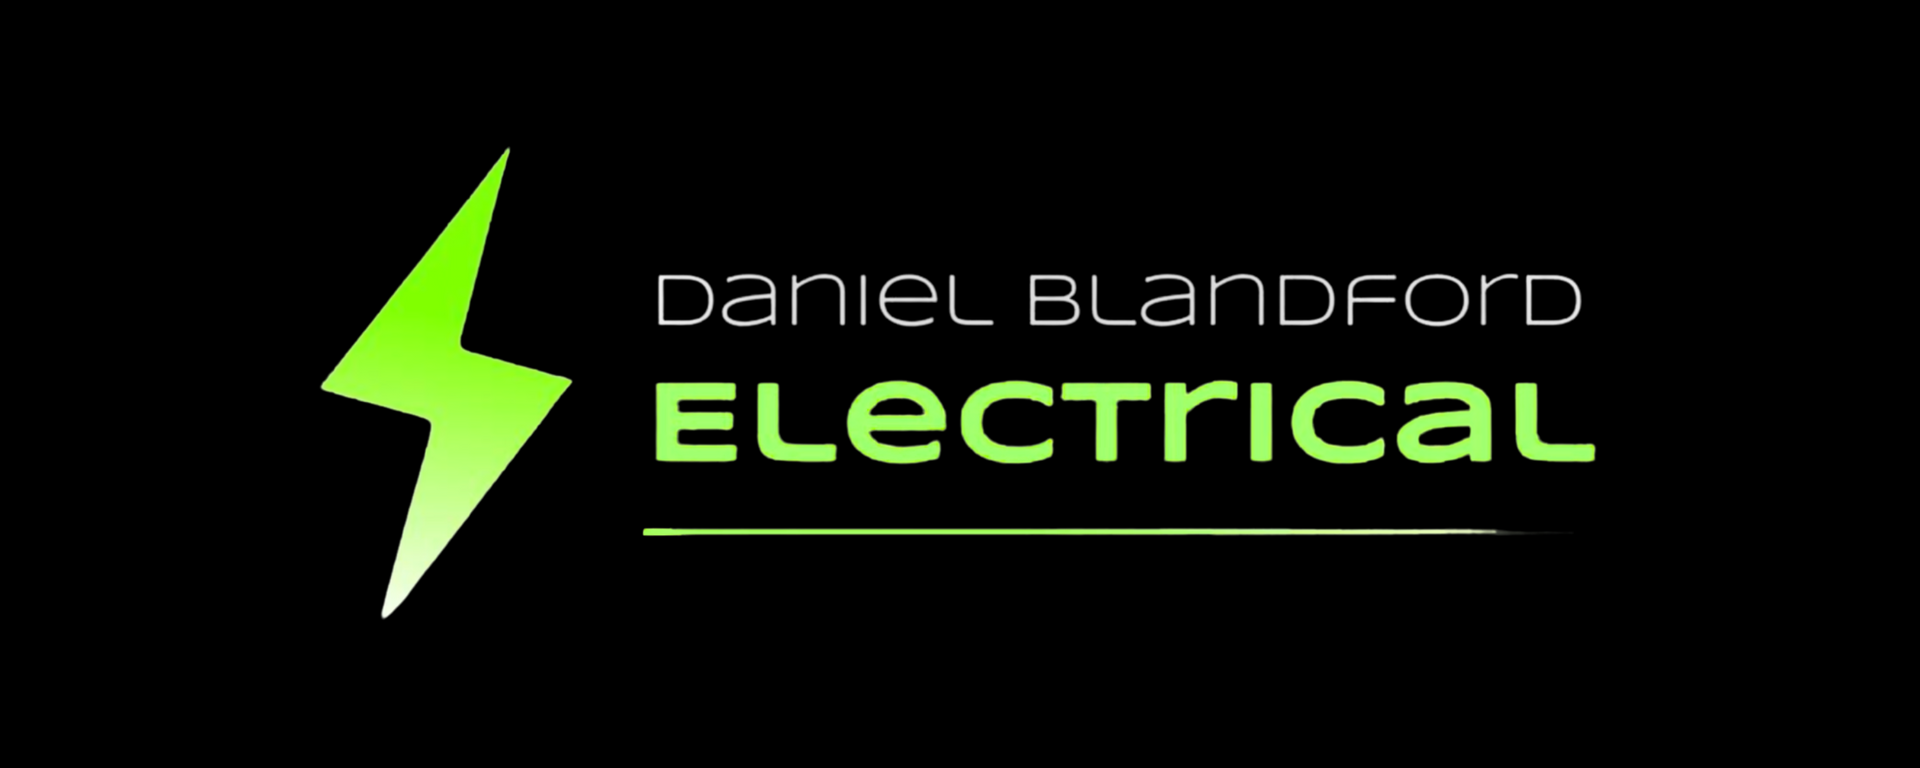 Daniel Blandford Electrical: Experienced Electrician in the Central West